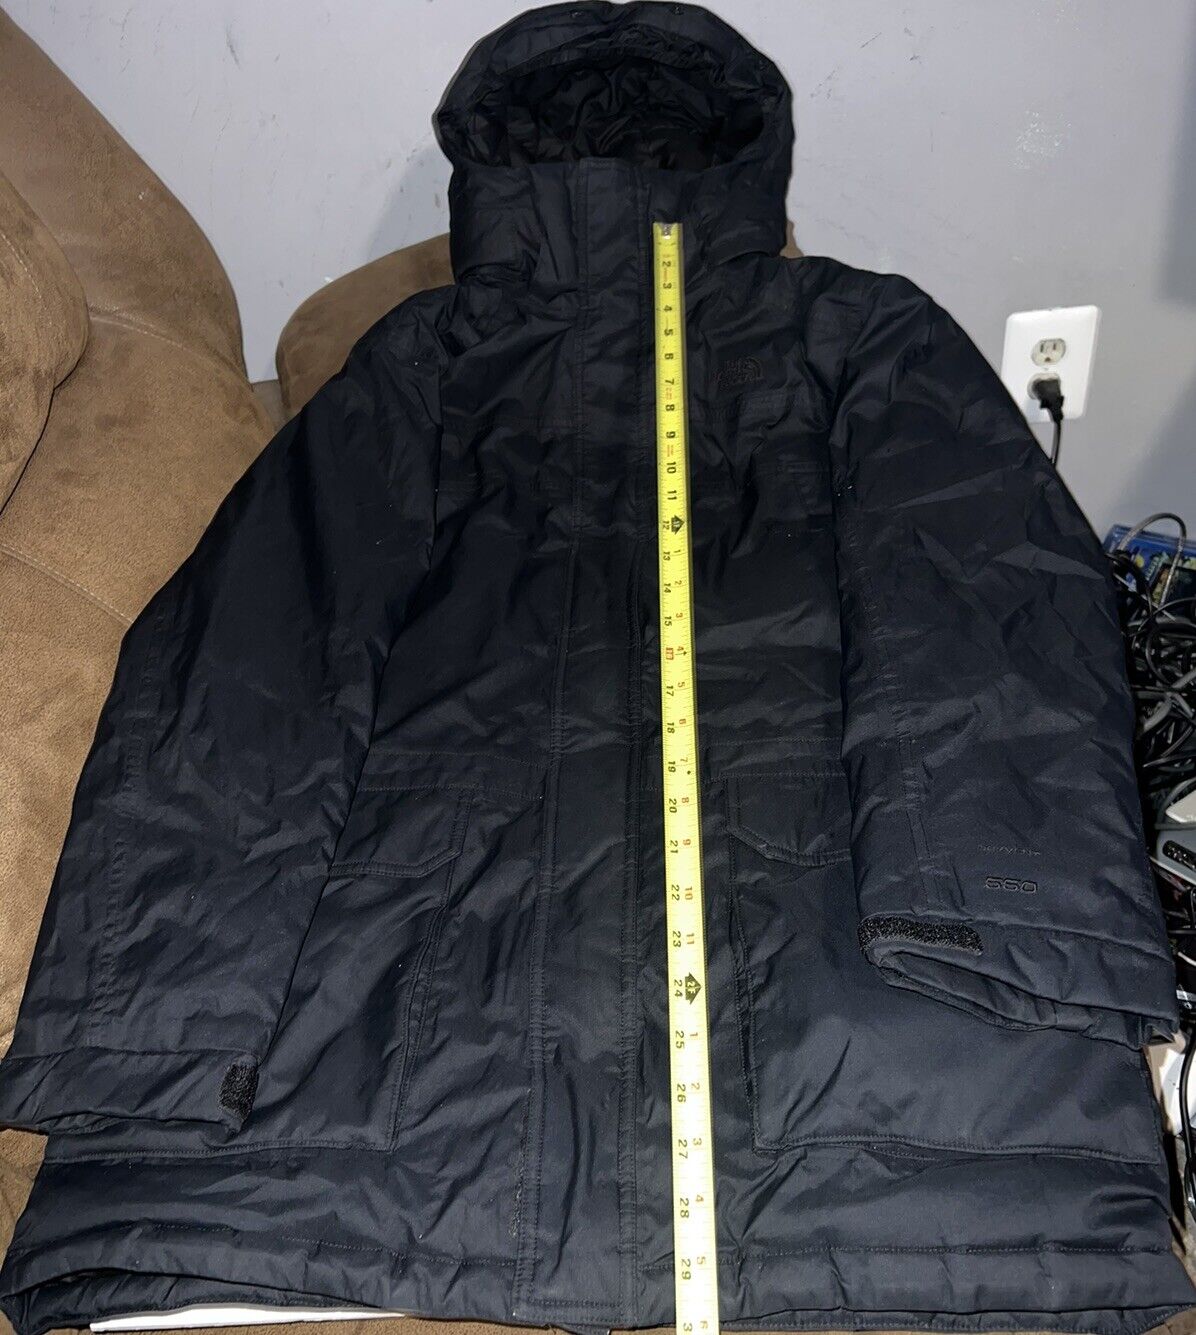 The North Face Jacket Parka 550 Goose Down Boys Size XL Hooded Black ...